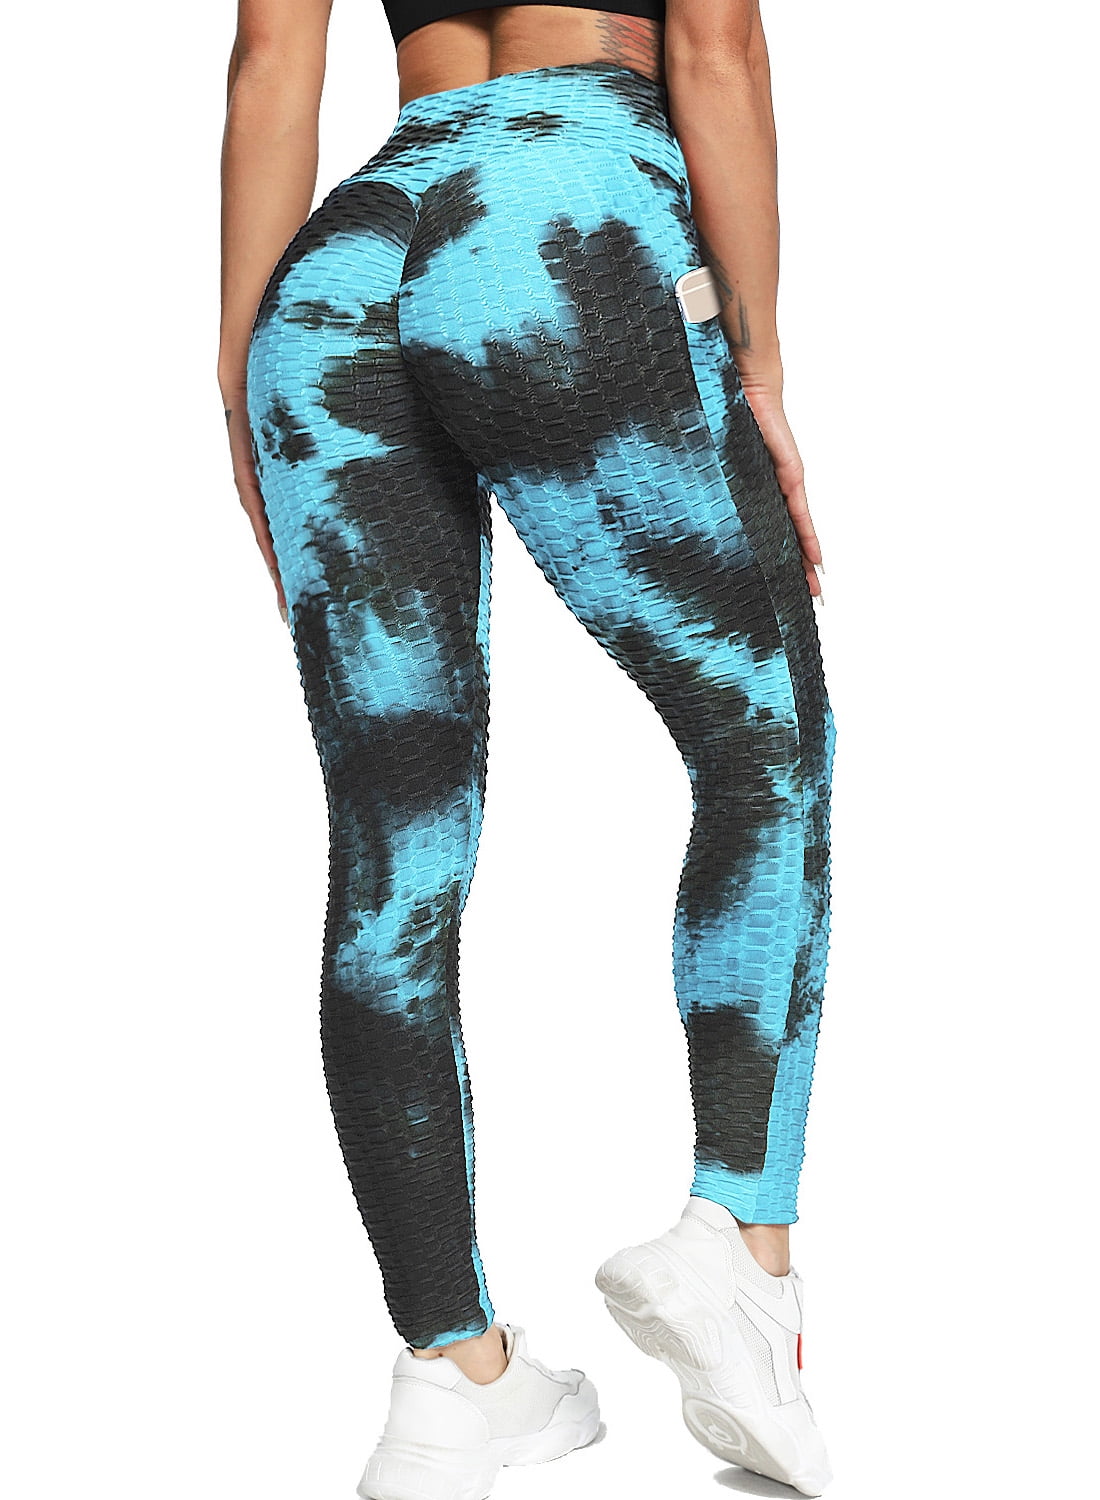 SEASUM Women's High Waist Tie Dyed Yoga Leggings With Pockets Tummy Control  Butt Lift Workout Pants Textured Slimming Tights Black+Blue L 